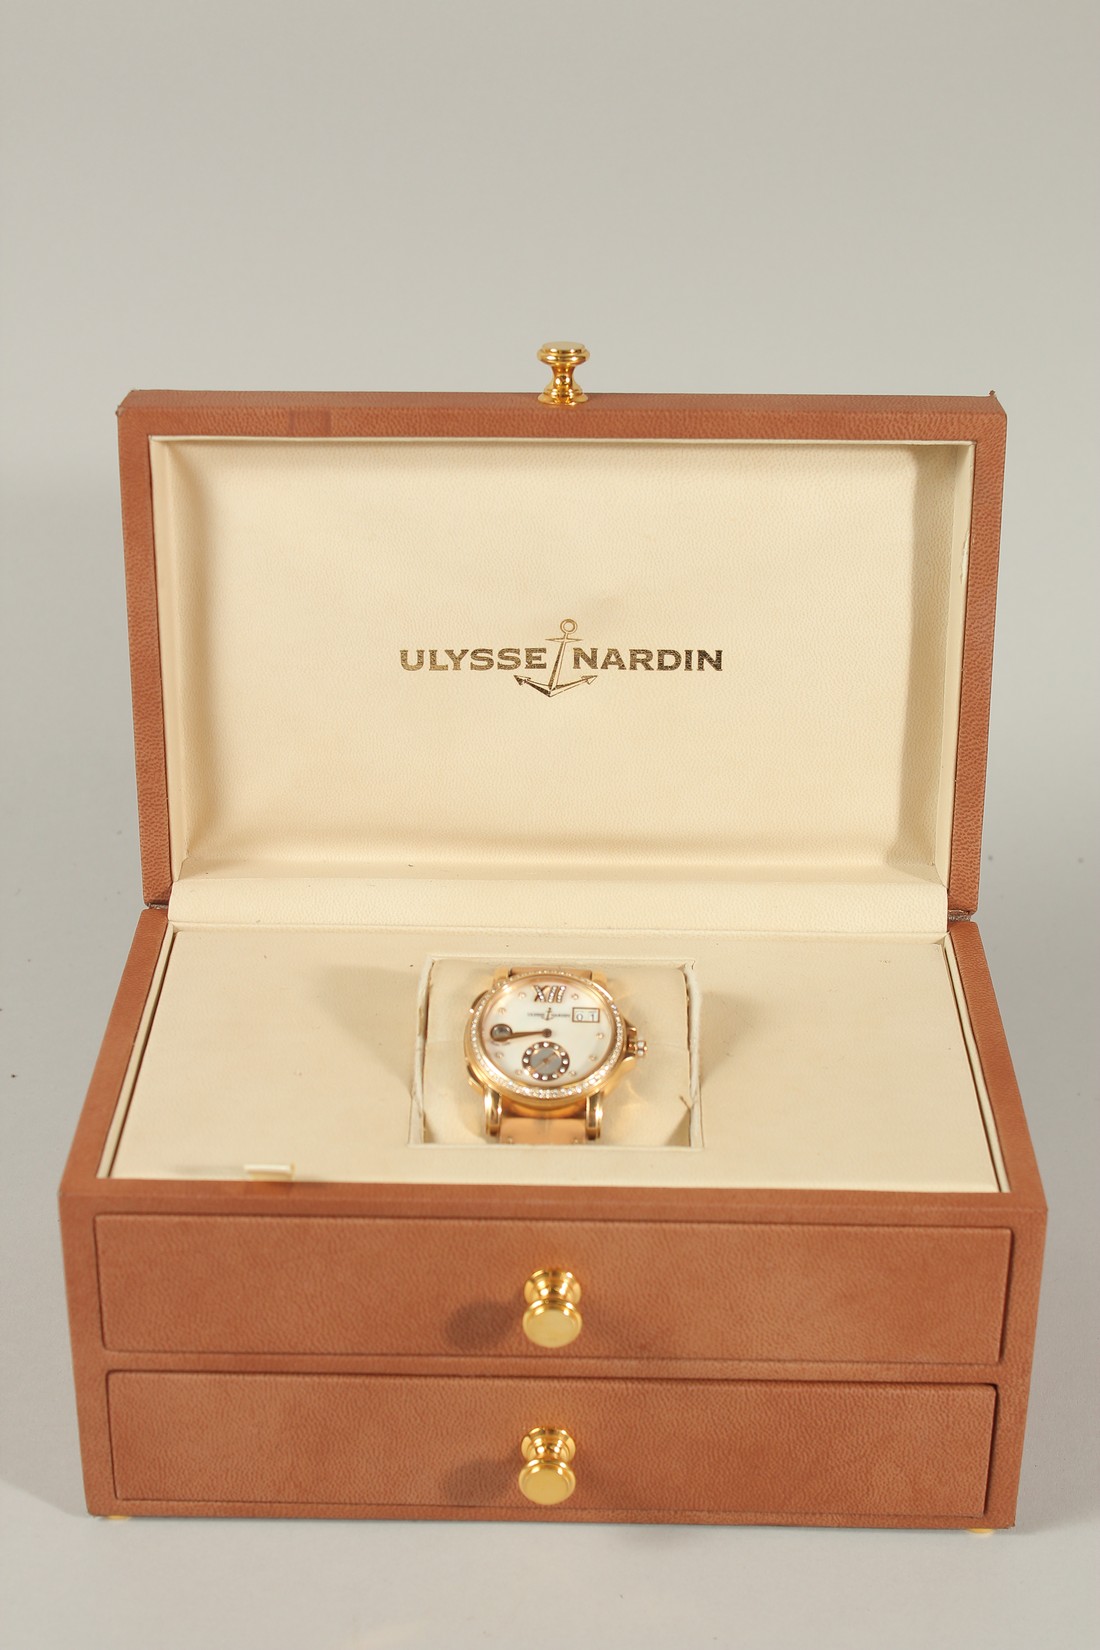 A SUPERB ULYSSE NARDIN 18CT ROSE GOLD WRISTWATCH with mother-of-pearl face, diamond surround, date - Image 11 of 14